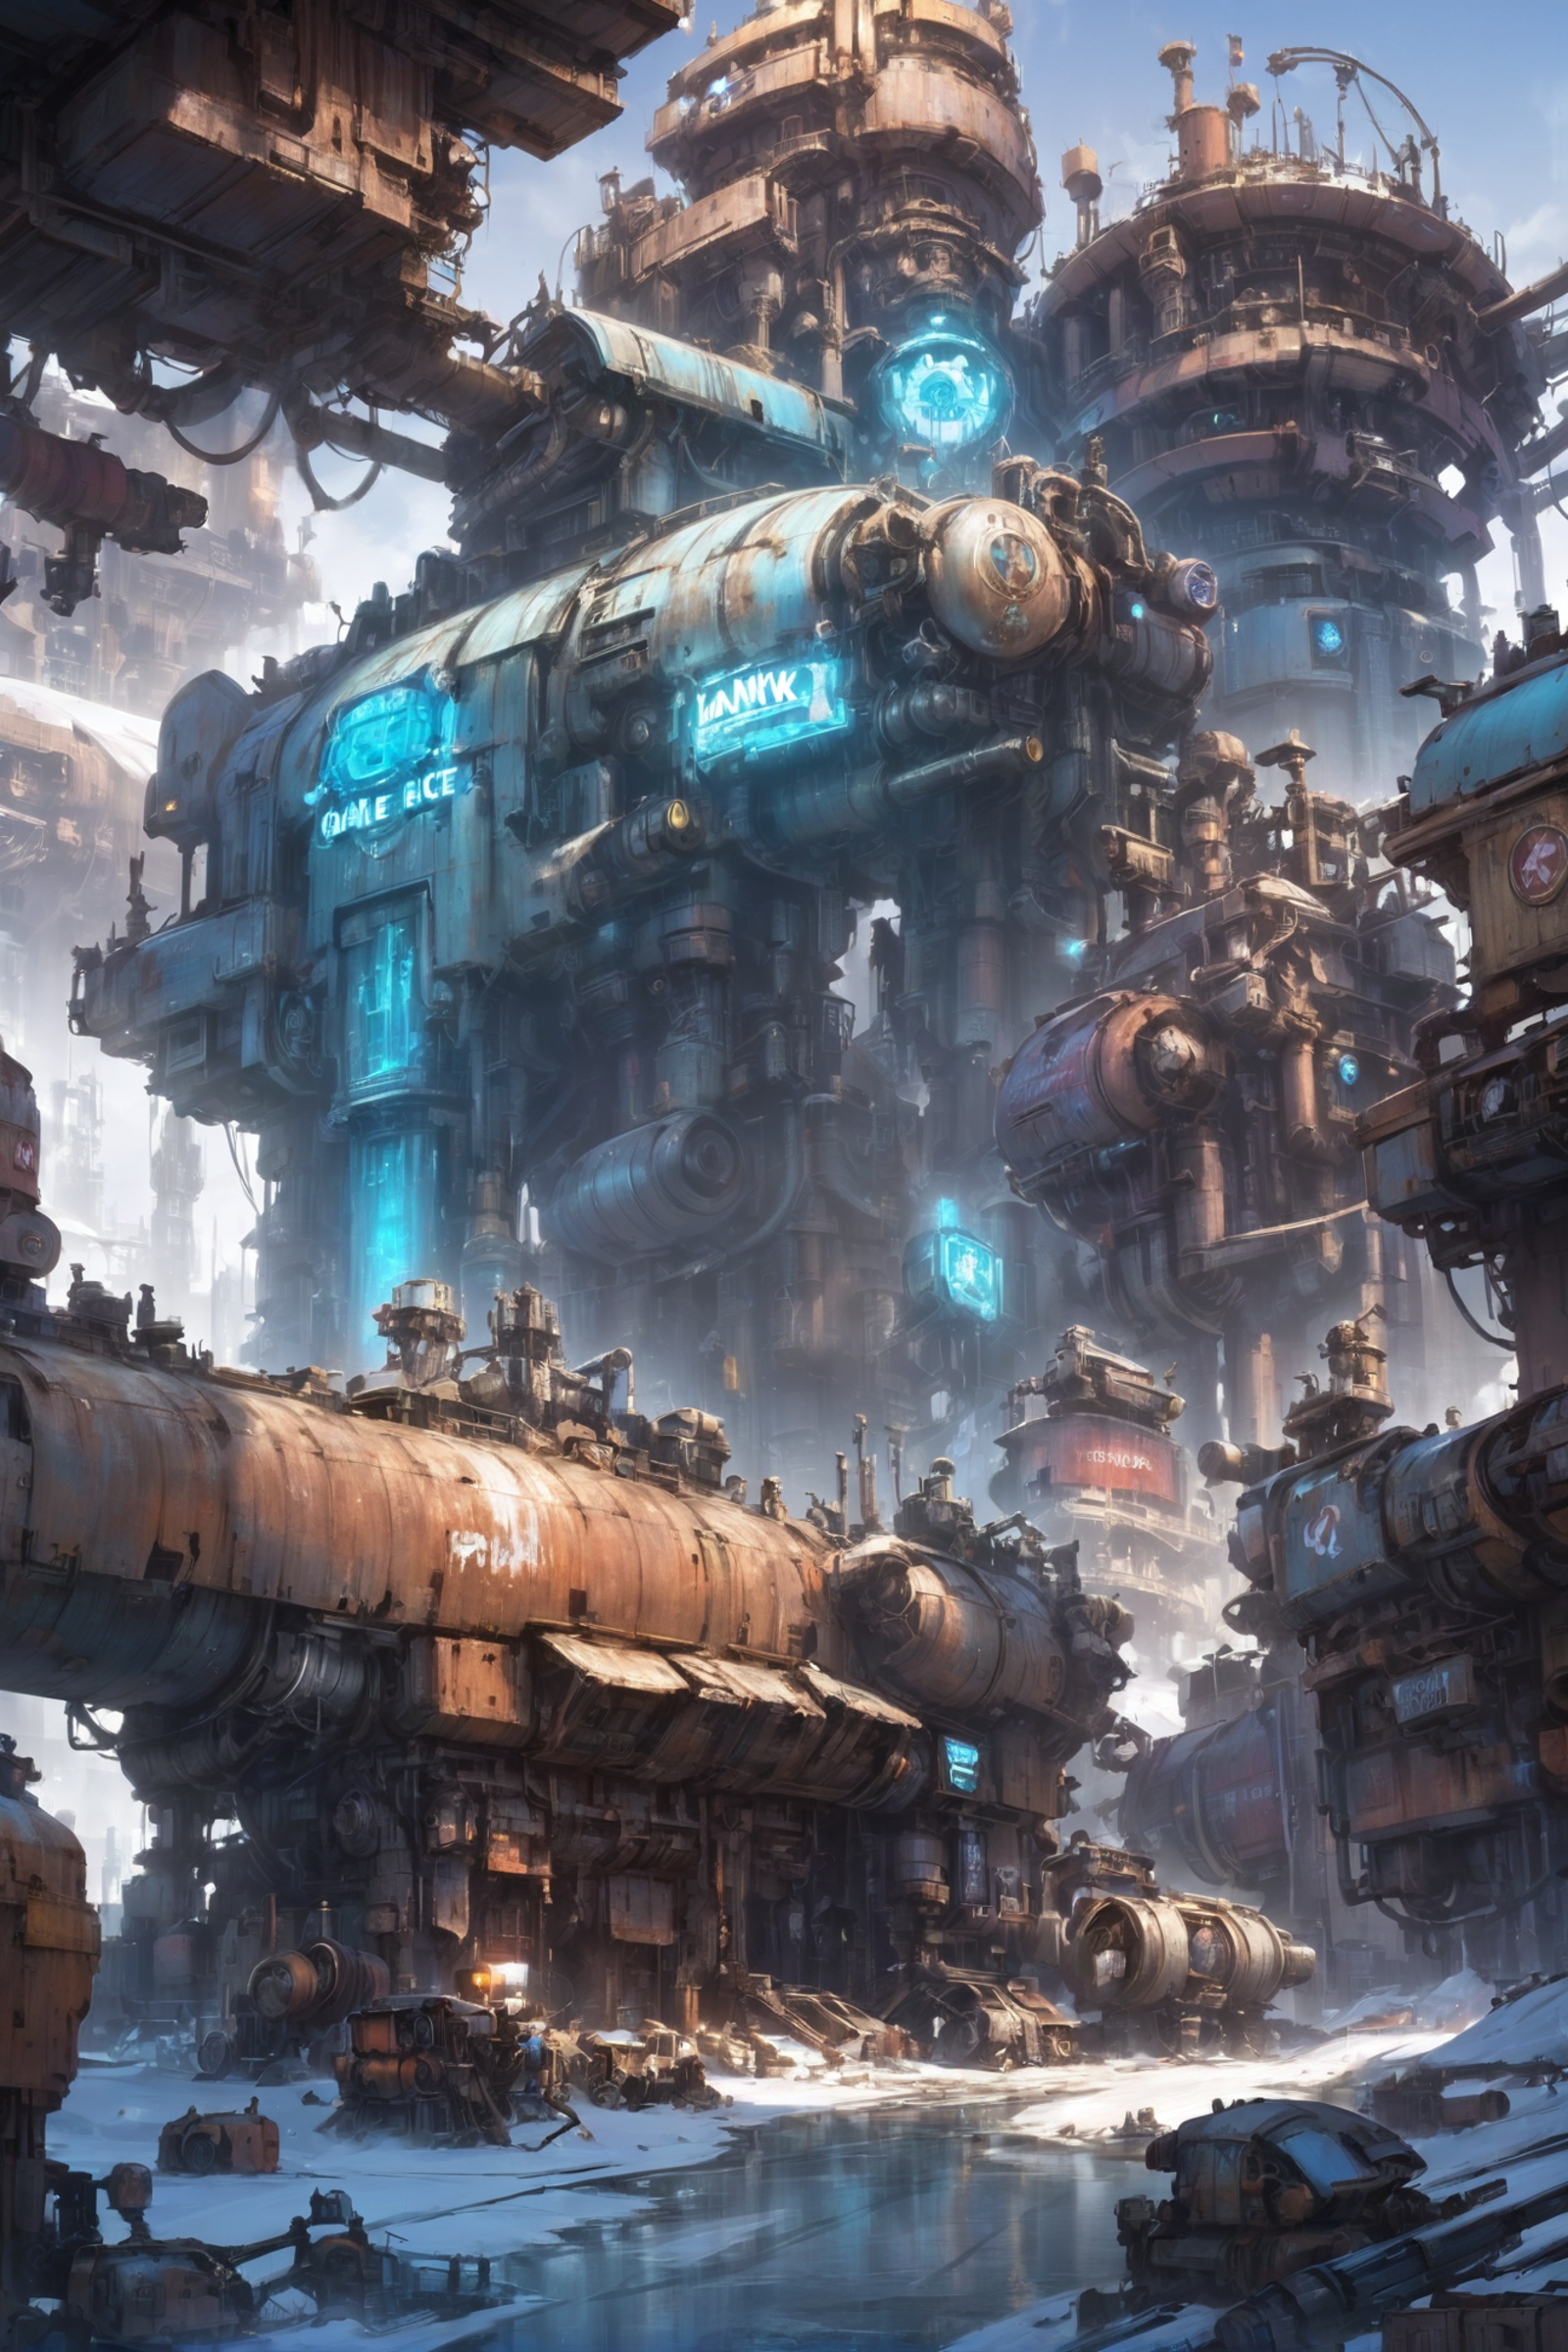 A large, intricate, and futuristic cityscape with graffiti on the side of buildings.